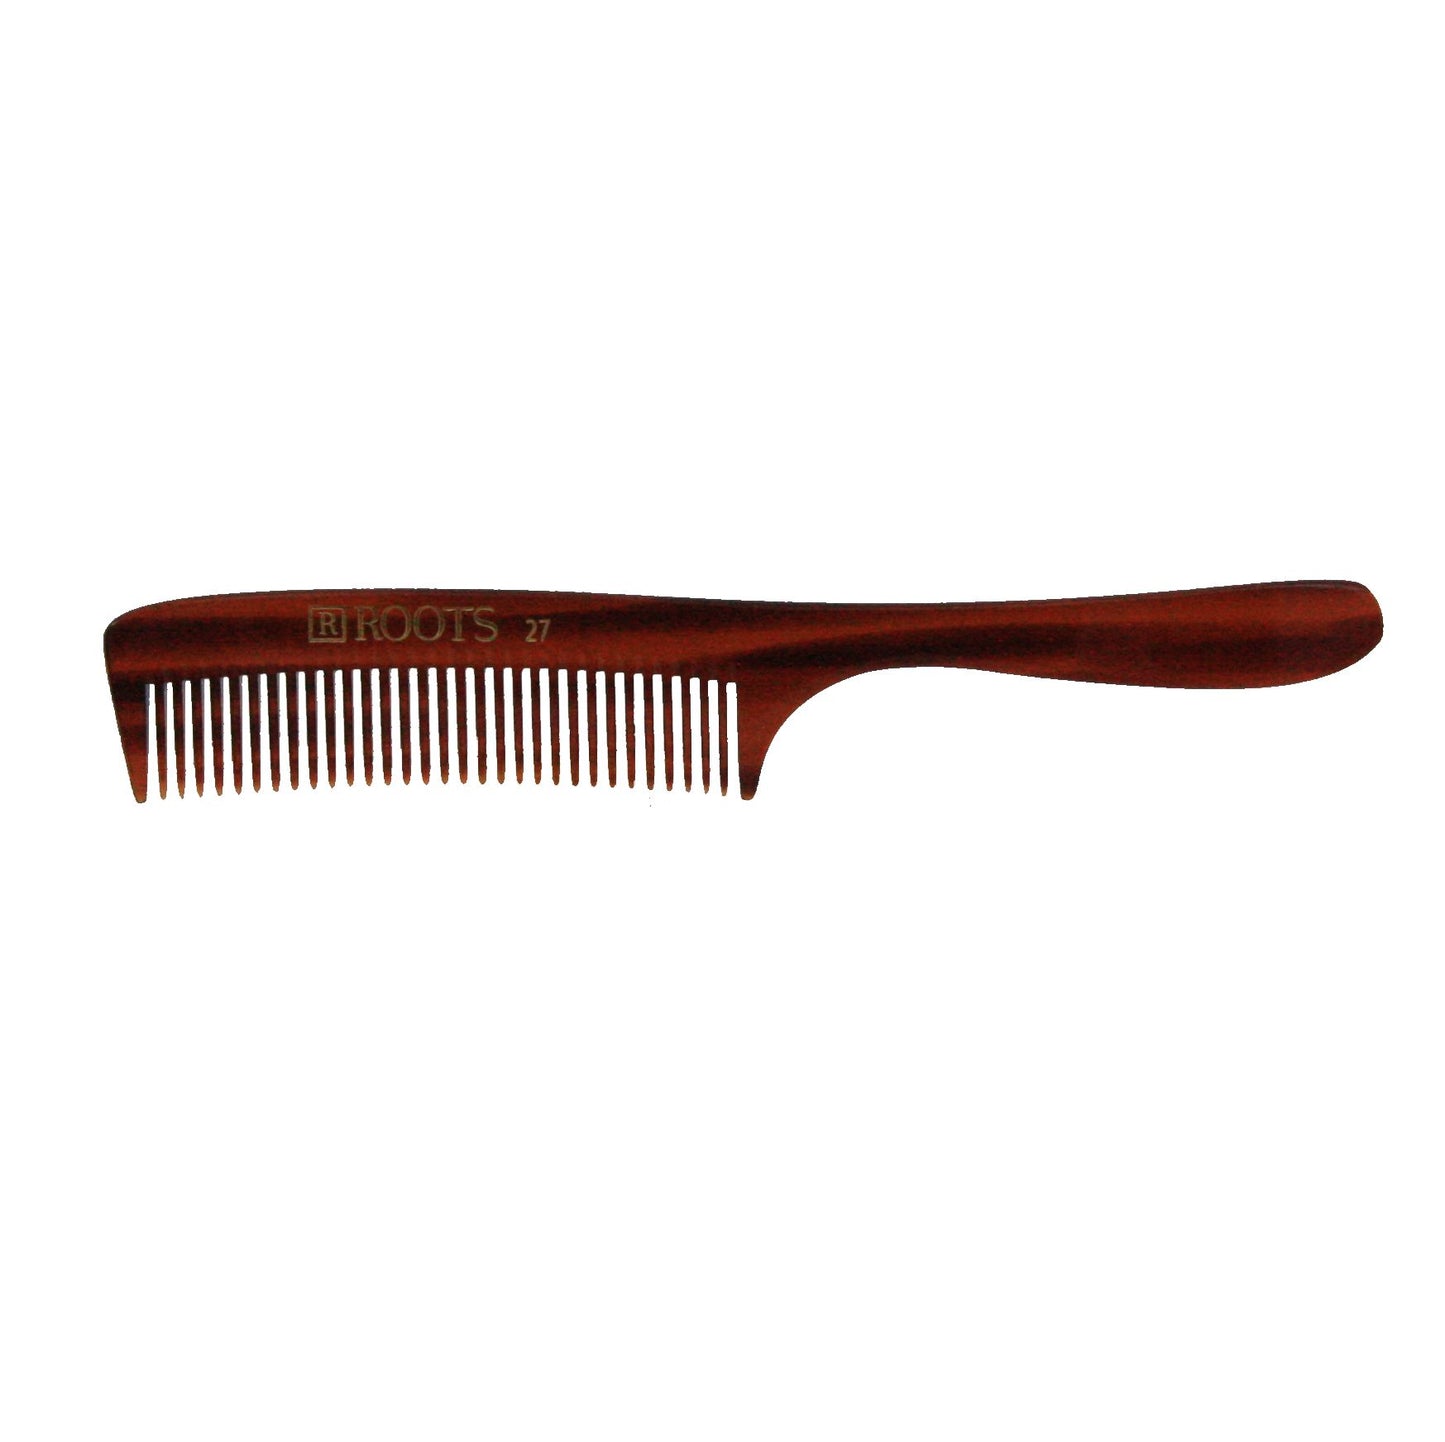 7in Roots 27 Cellulose Acetate Handle Comb - Clearance